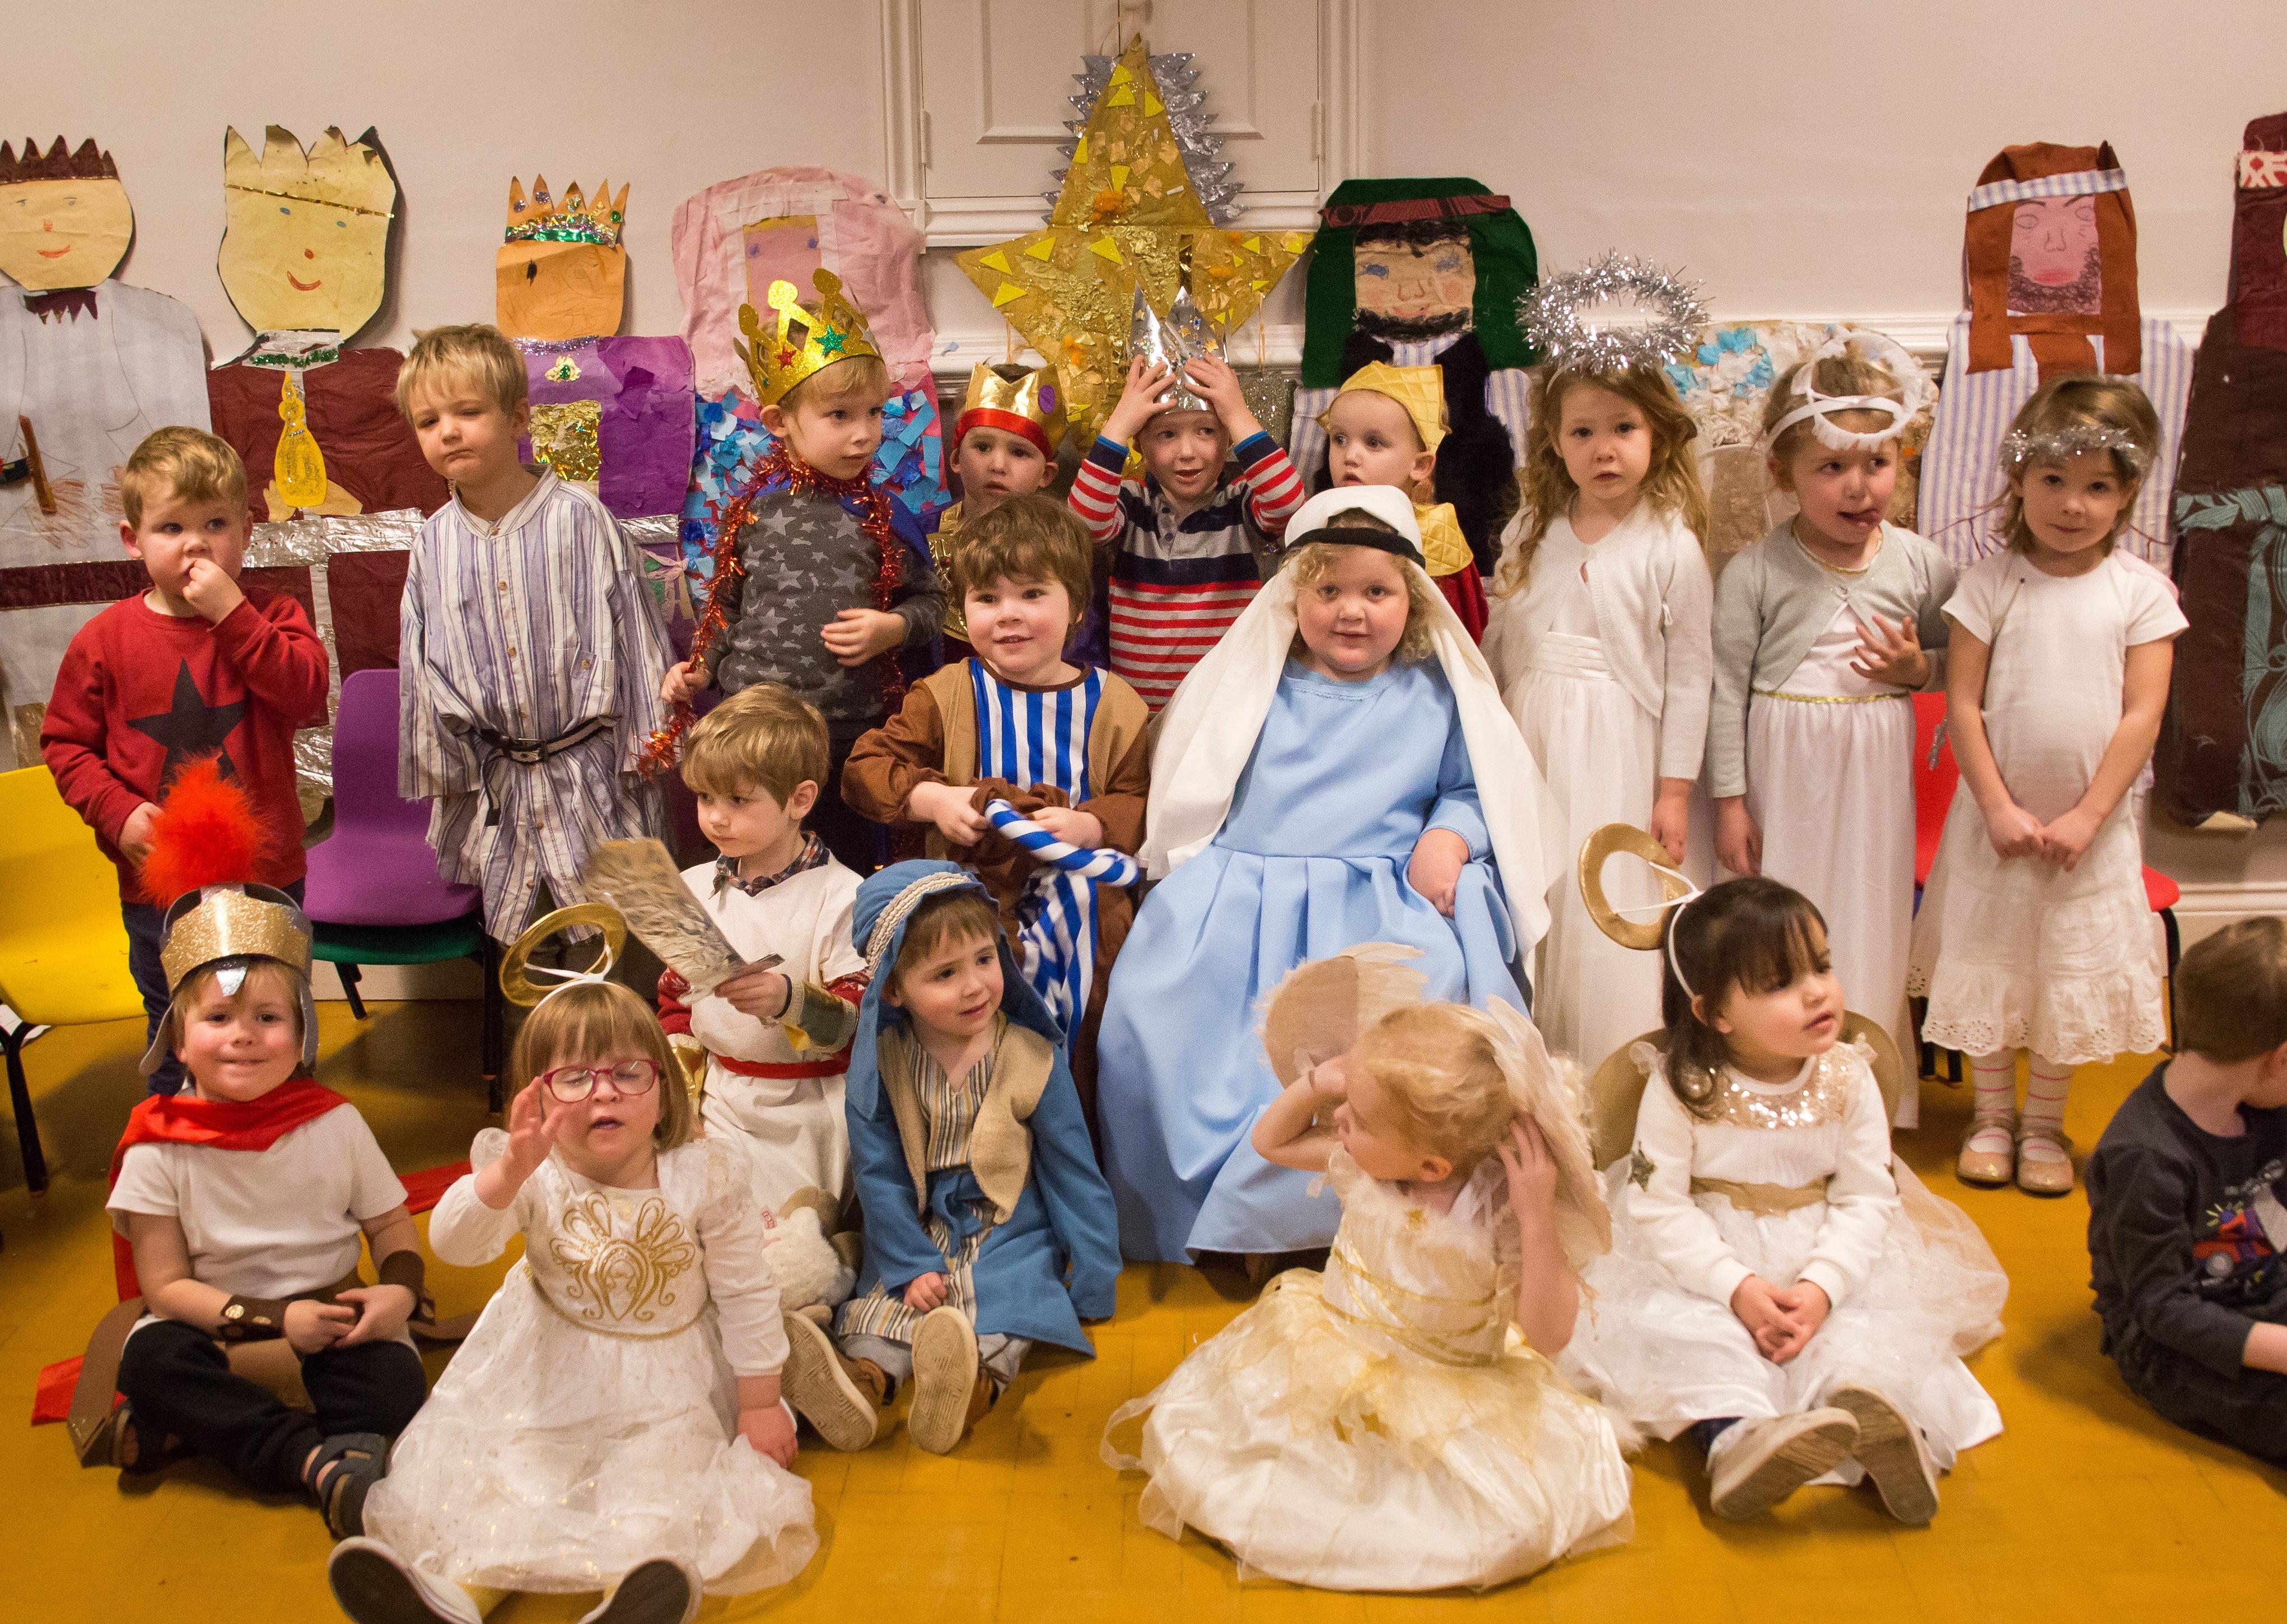 Plaistow Pre-School - Plaistow Village Hall was once again a hive of activity and excitement on as the children, aged between two and four-years-old, proudly took to the stage dressed as shepherds, angels, kings and soldiers and awaited Mary’s arrival on the back of Chester the donkey. The audience all enjoyed festive refreshments whilst vying for prizes in a generously donated raffle, all raising much appreciated funds for the charity-run village pre-school. SUS-191216-151614001